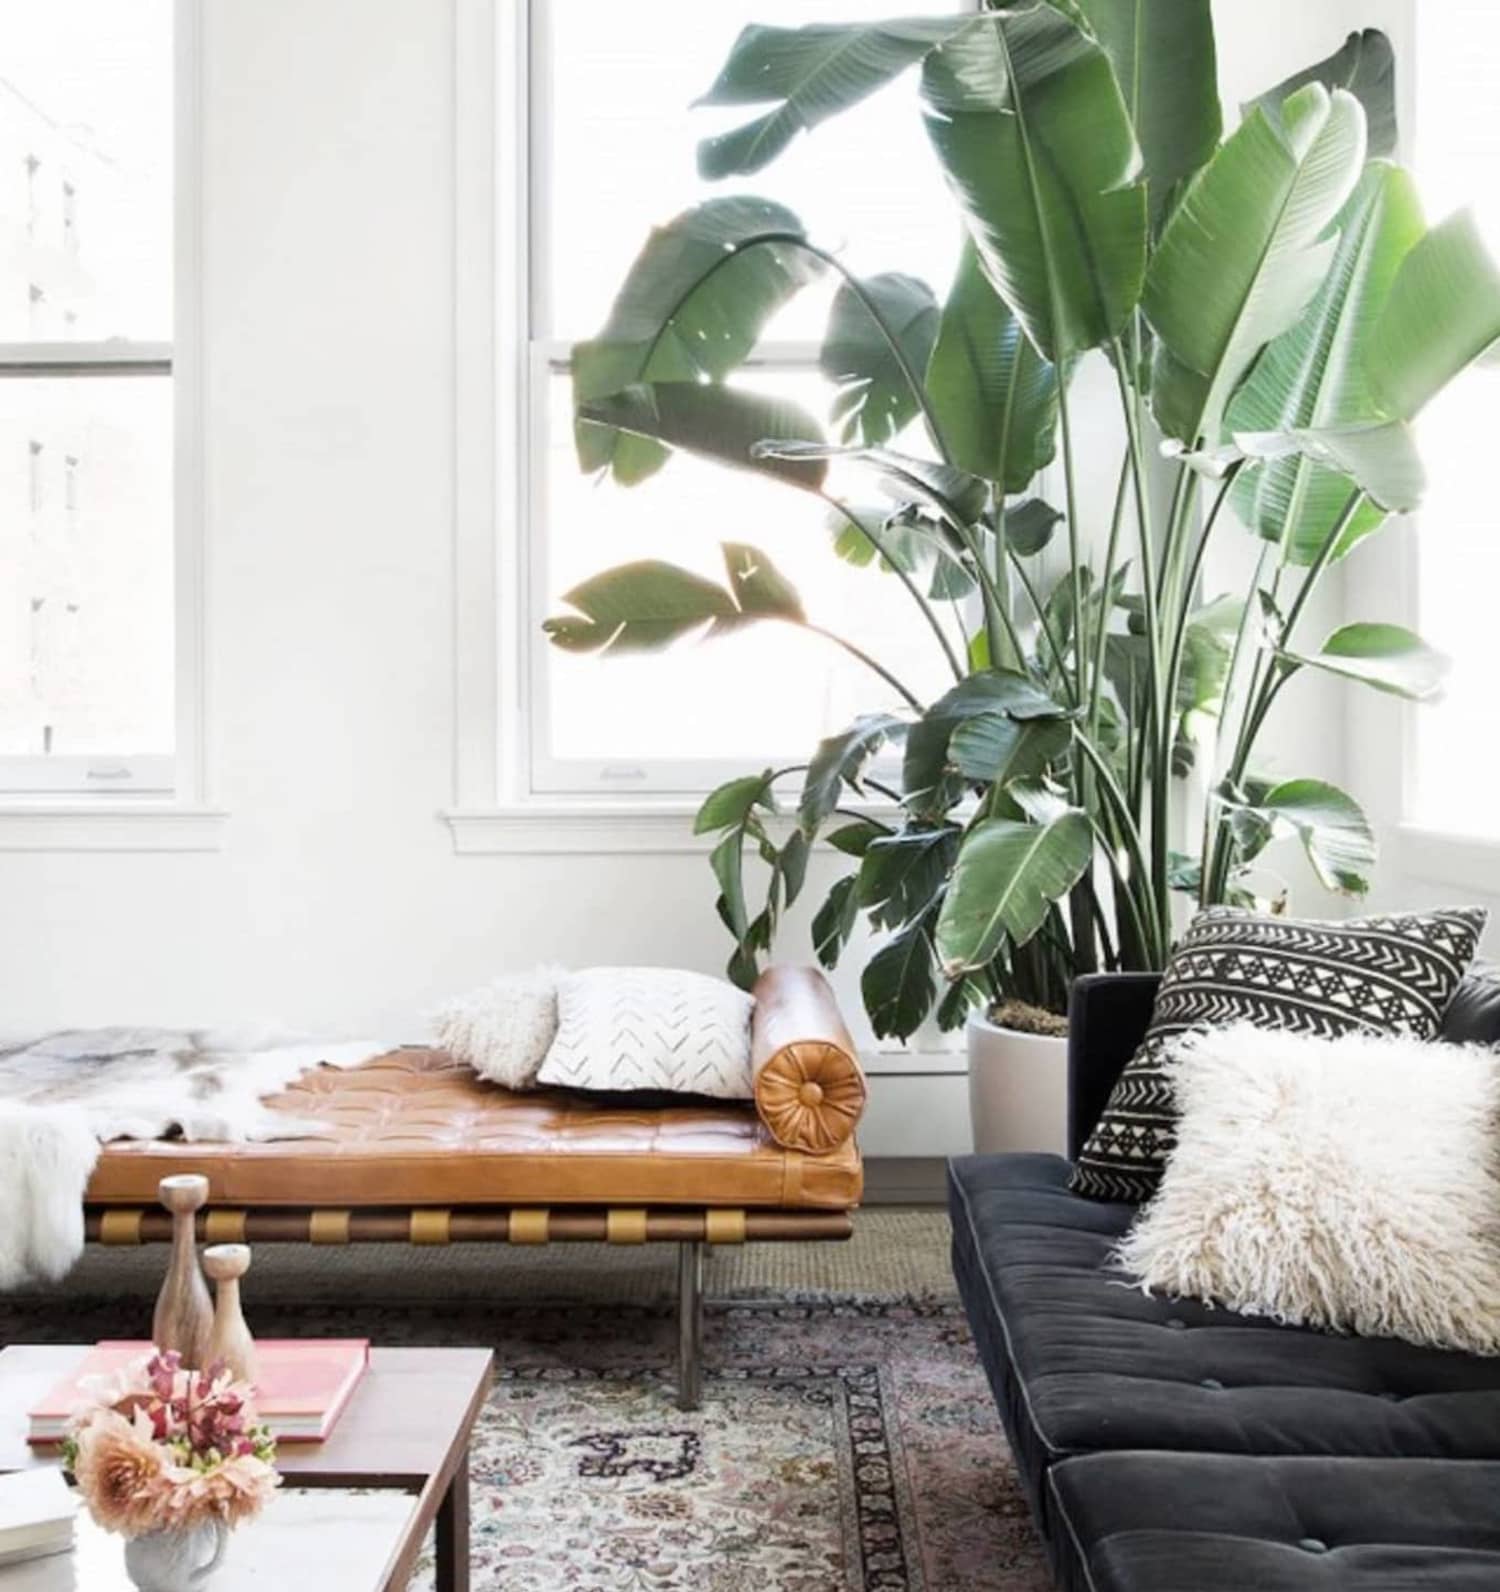 12 Best Indoor Trees - Large Floor Plants for a Bold Statement ...